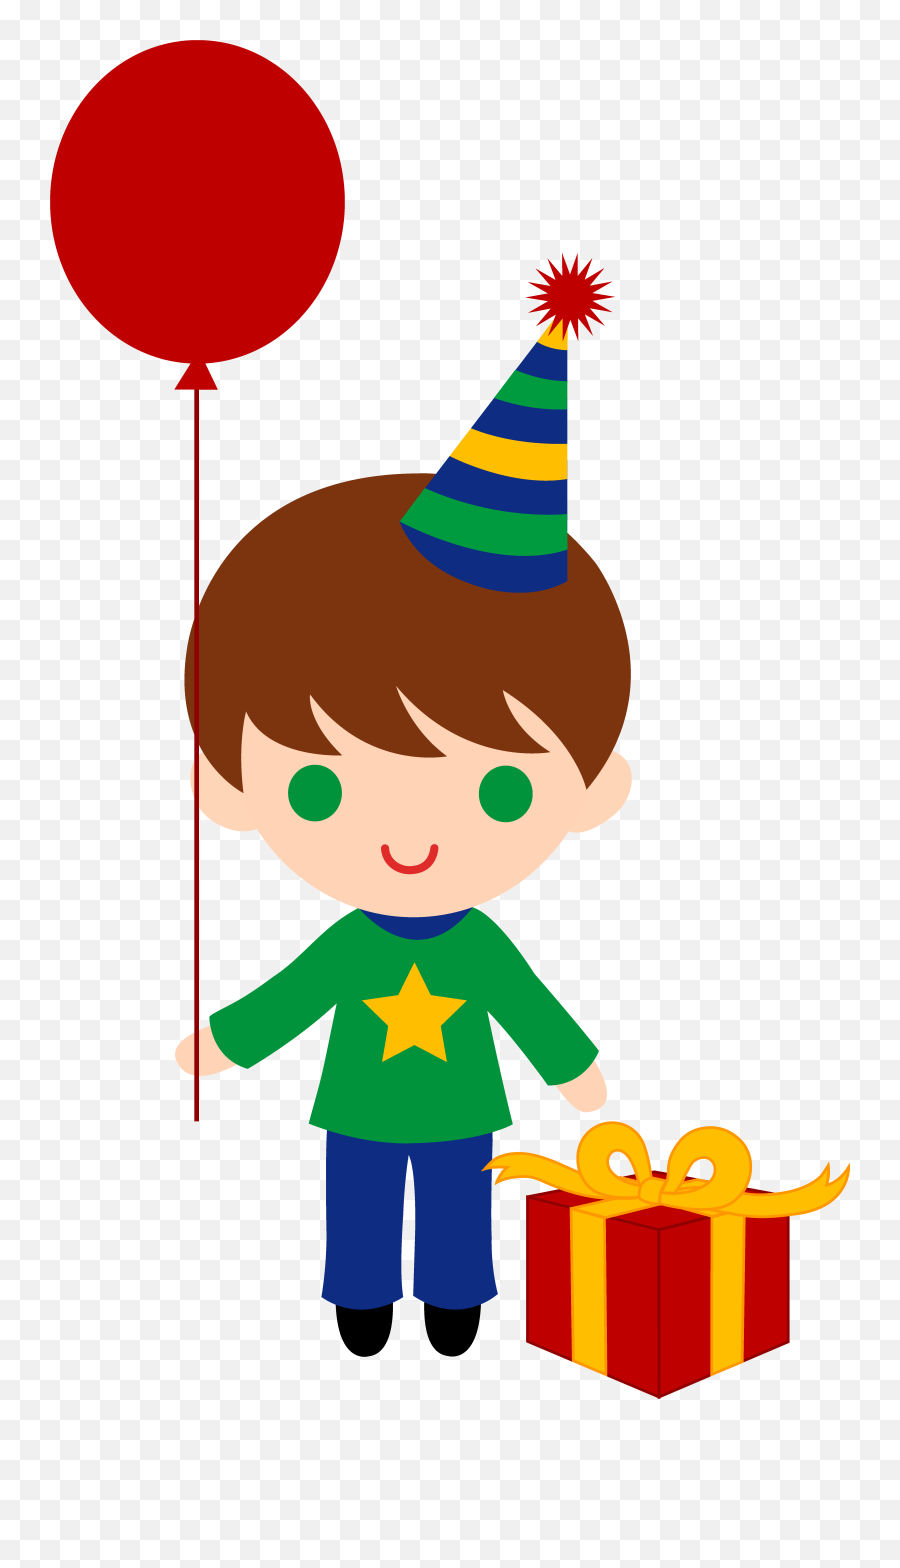 Free Birthday Pictures For Boys Download Free Clip Art - Birthday Boy Clipart Emoji,Birthday Clipart